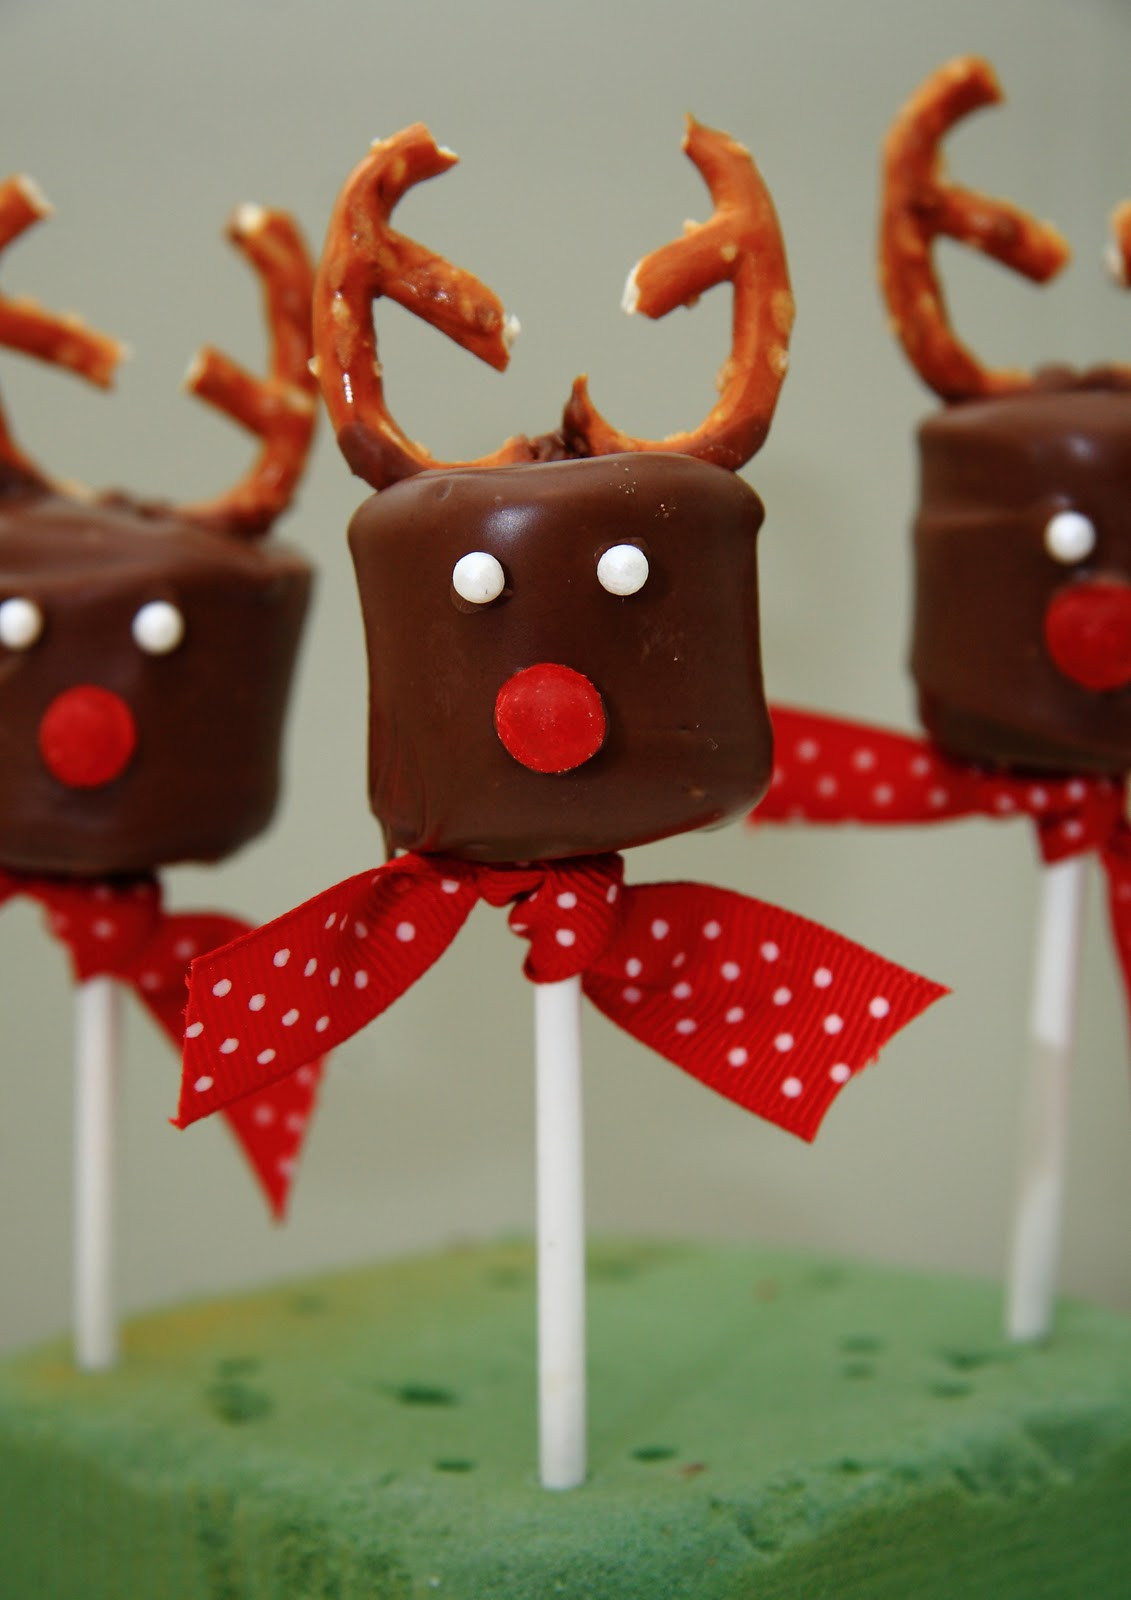 Christmas Party Ideas For Toddler
 21 Amazing Christmas Party Ideas for Kids